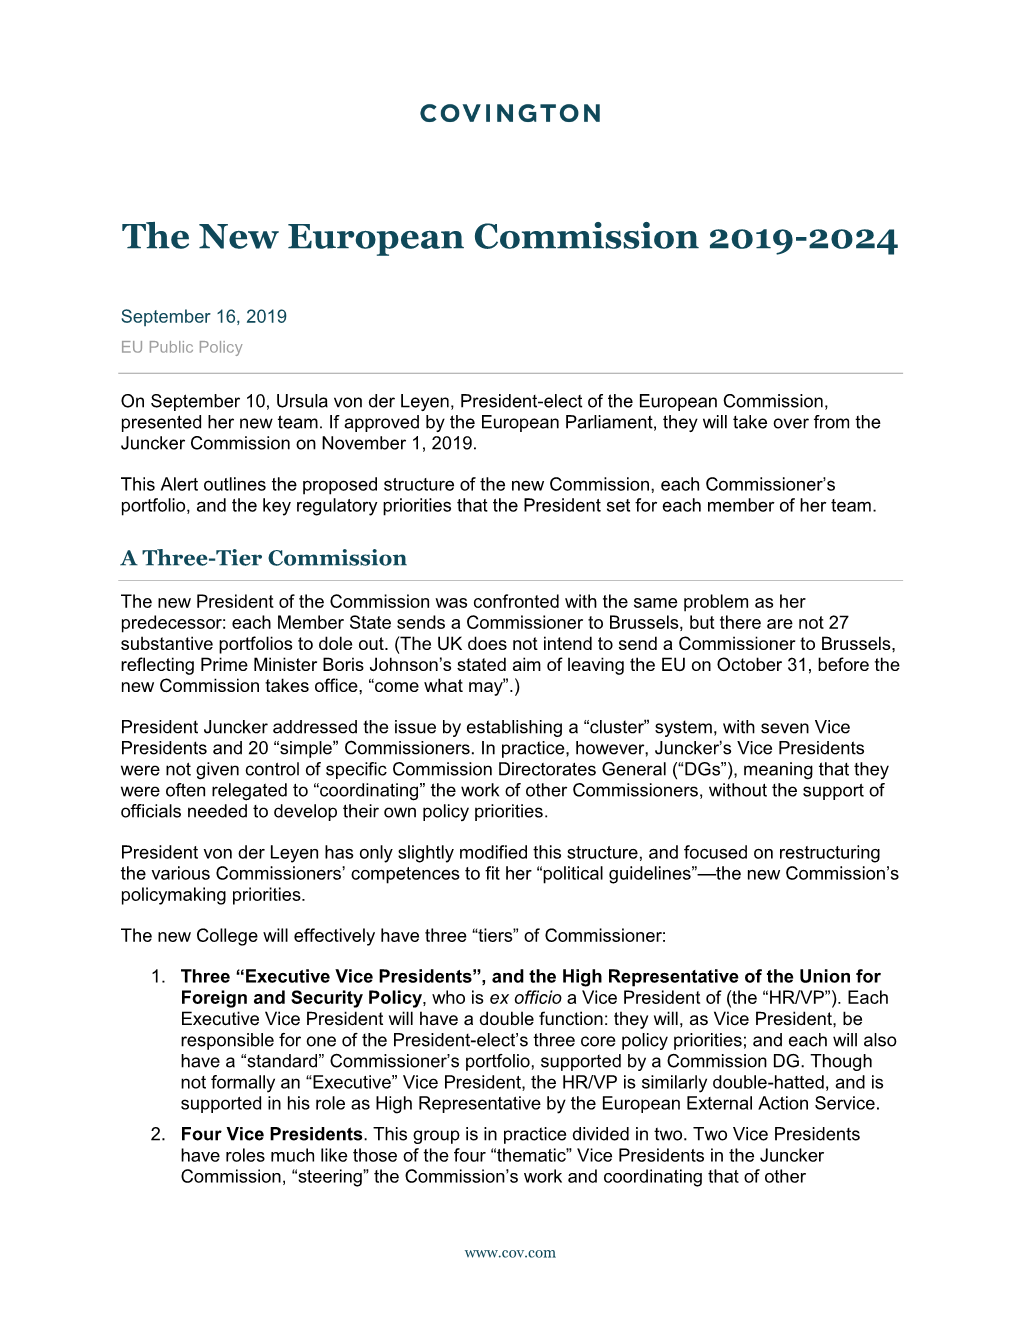 The New European Commission 2019-2024